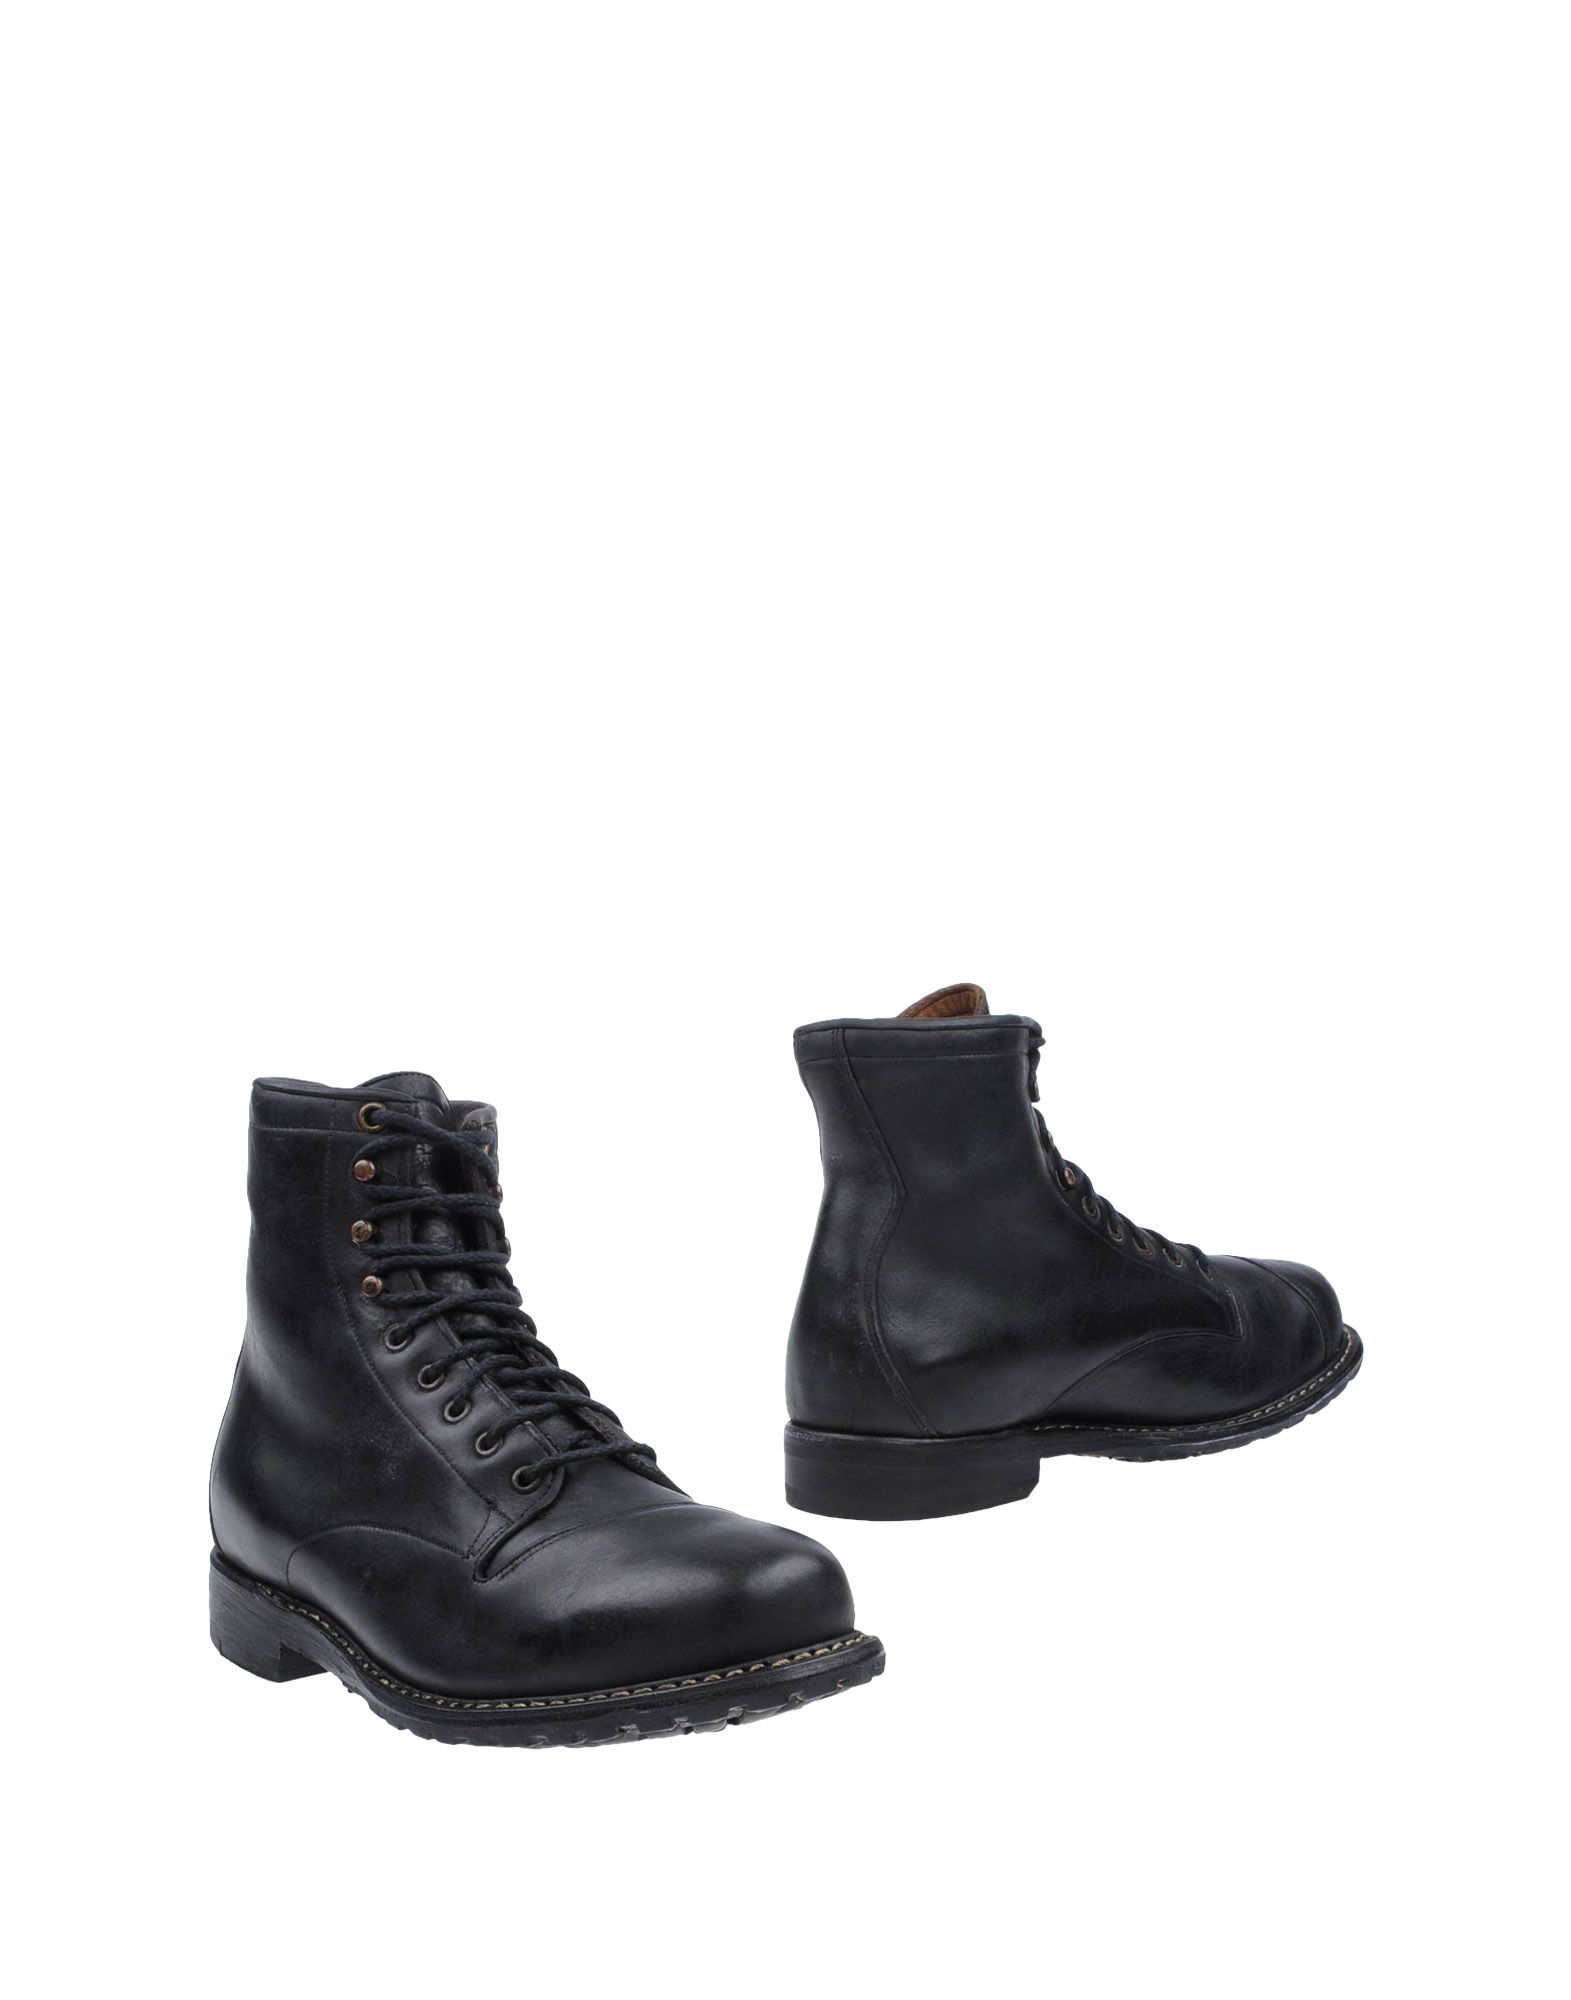 Timberland Combat Boots in Black for Men - Lyst